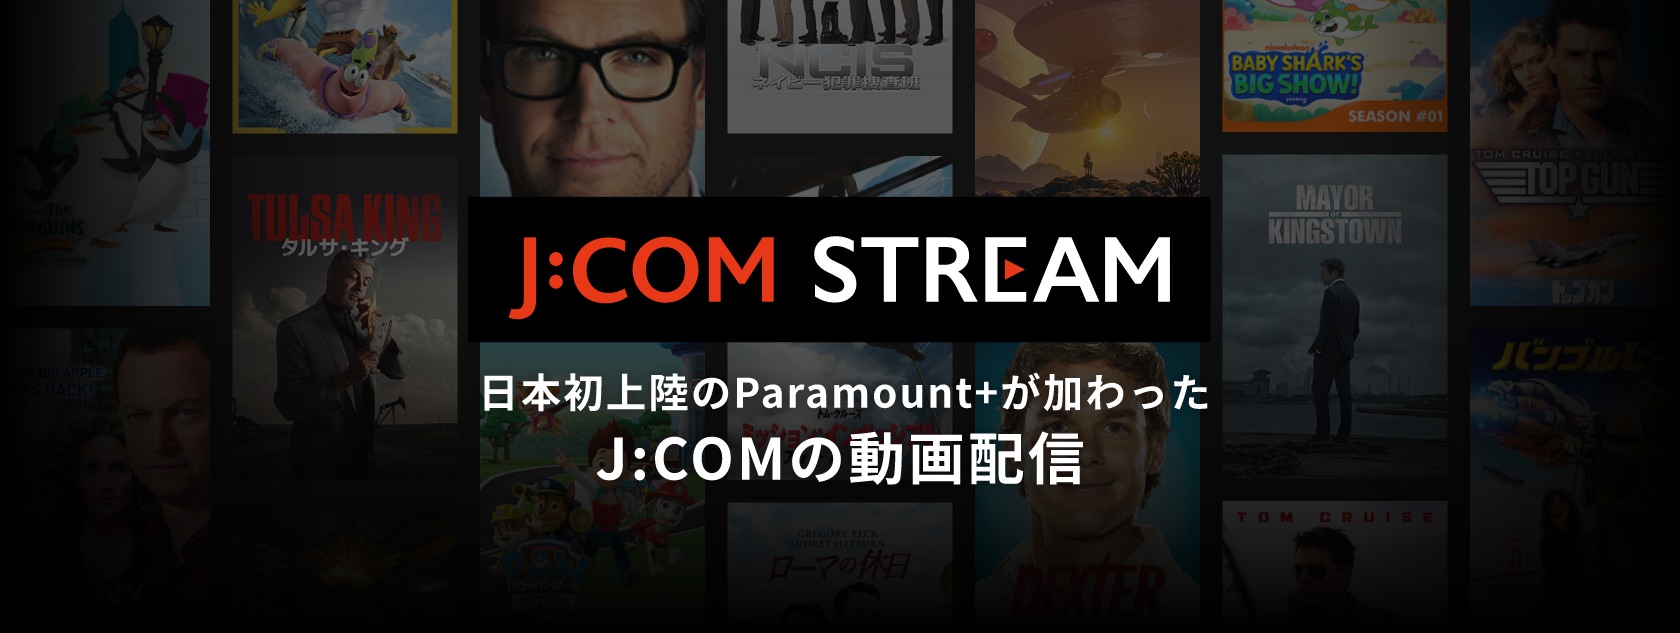 J:COM video distribution with the addition of Paramount+, which landed in Japan for the first time